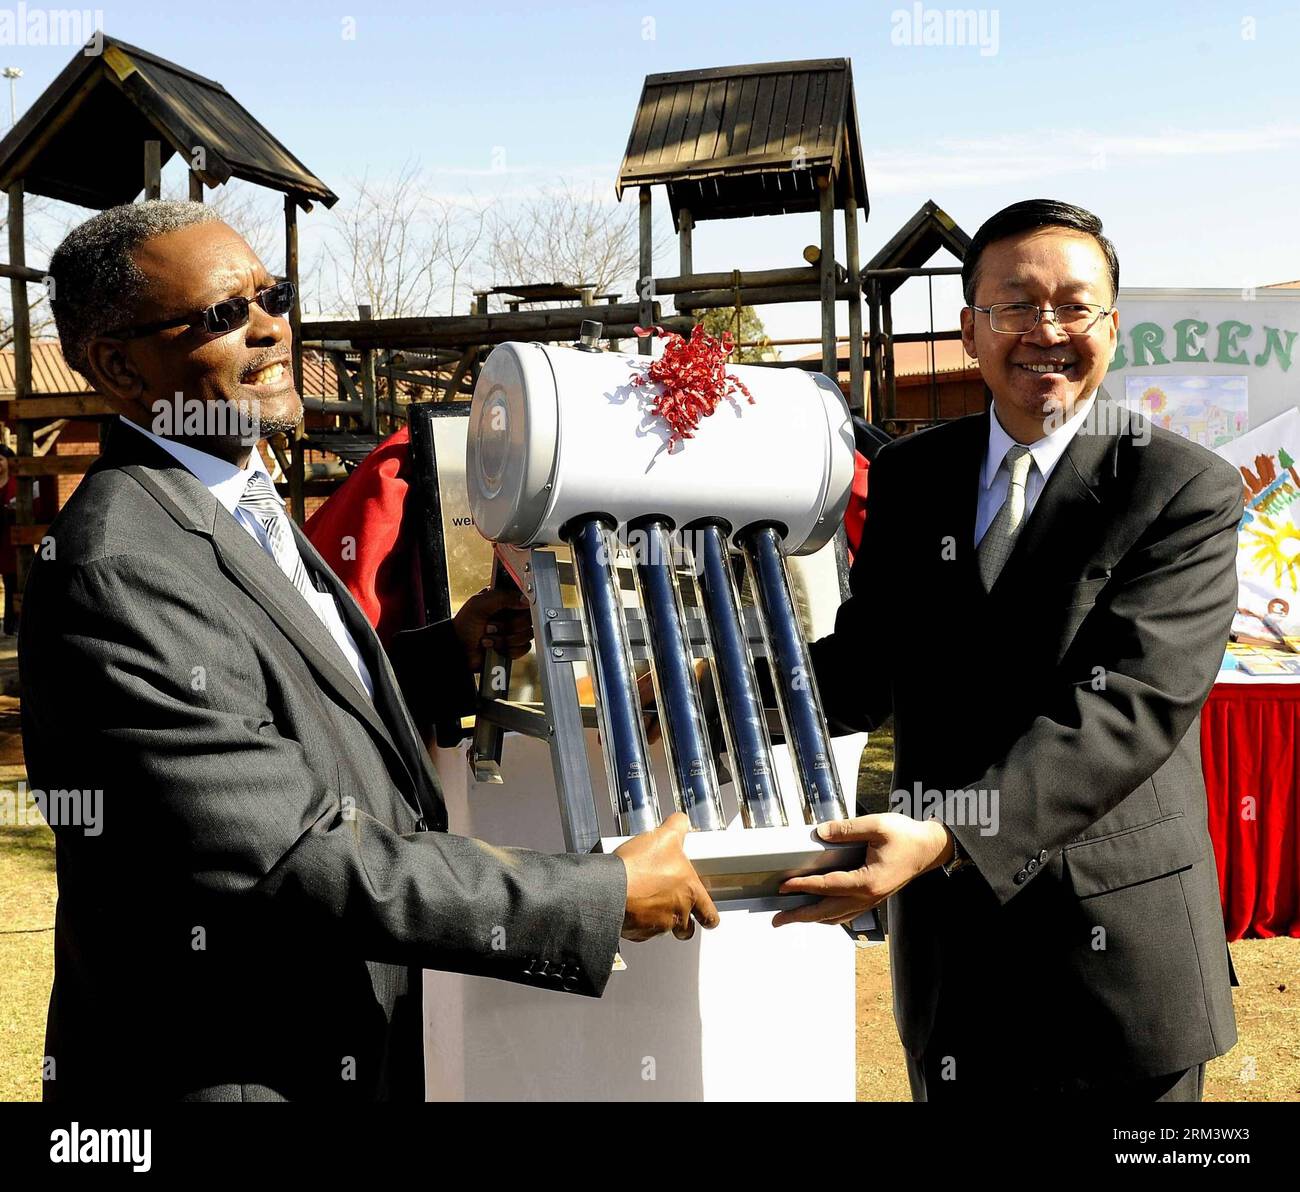 Bildnummer: 60337259  Datum: 07.08.2013  Copyright: imago/Xinhua Chinese Ambassador to South Africa Tian Xuejun (R) hands over a model of the donated solar water heaters to a Children s Village official during a donation ceremony in Pretoria, Aug. 7, 2013. Chinese Embassy in South Africa Wednesday donated a number of solar water heaters to Mamelodi SOS Children s Village in Pretoria, which can save about 70,000 U.S. dollars from electricity fee a year. (Xinhua/Li Qihua) SOUTH AFRICA-PRETORIA-CHINA-DONATION PUBLICATIONxNOTxINxCHN People xns x0x 2013 quadrat     60337259 Date 07 08 2013 Copyrigh Stock Photo